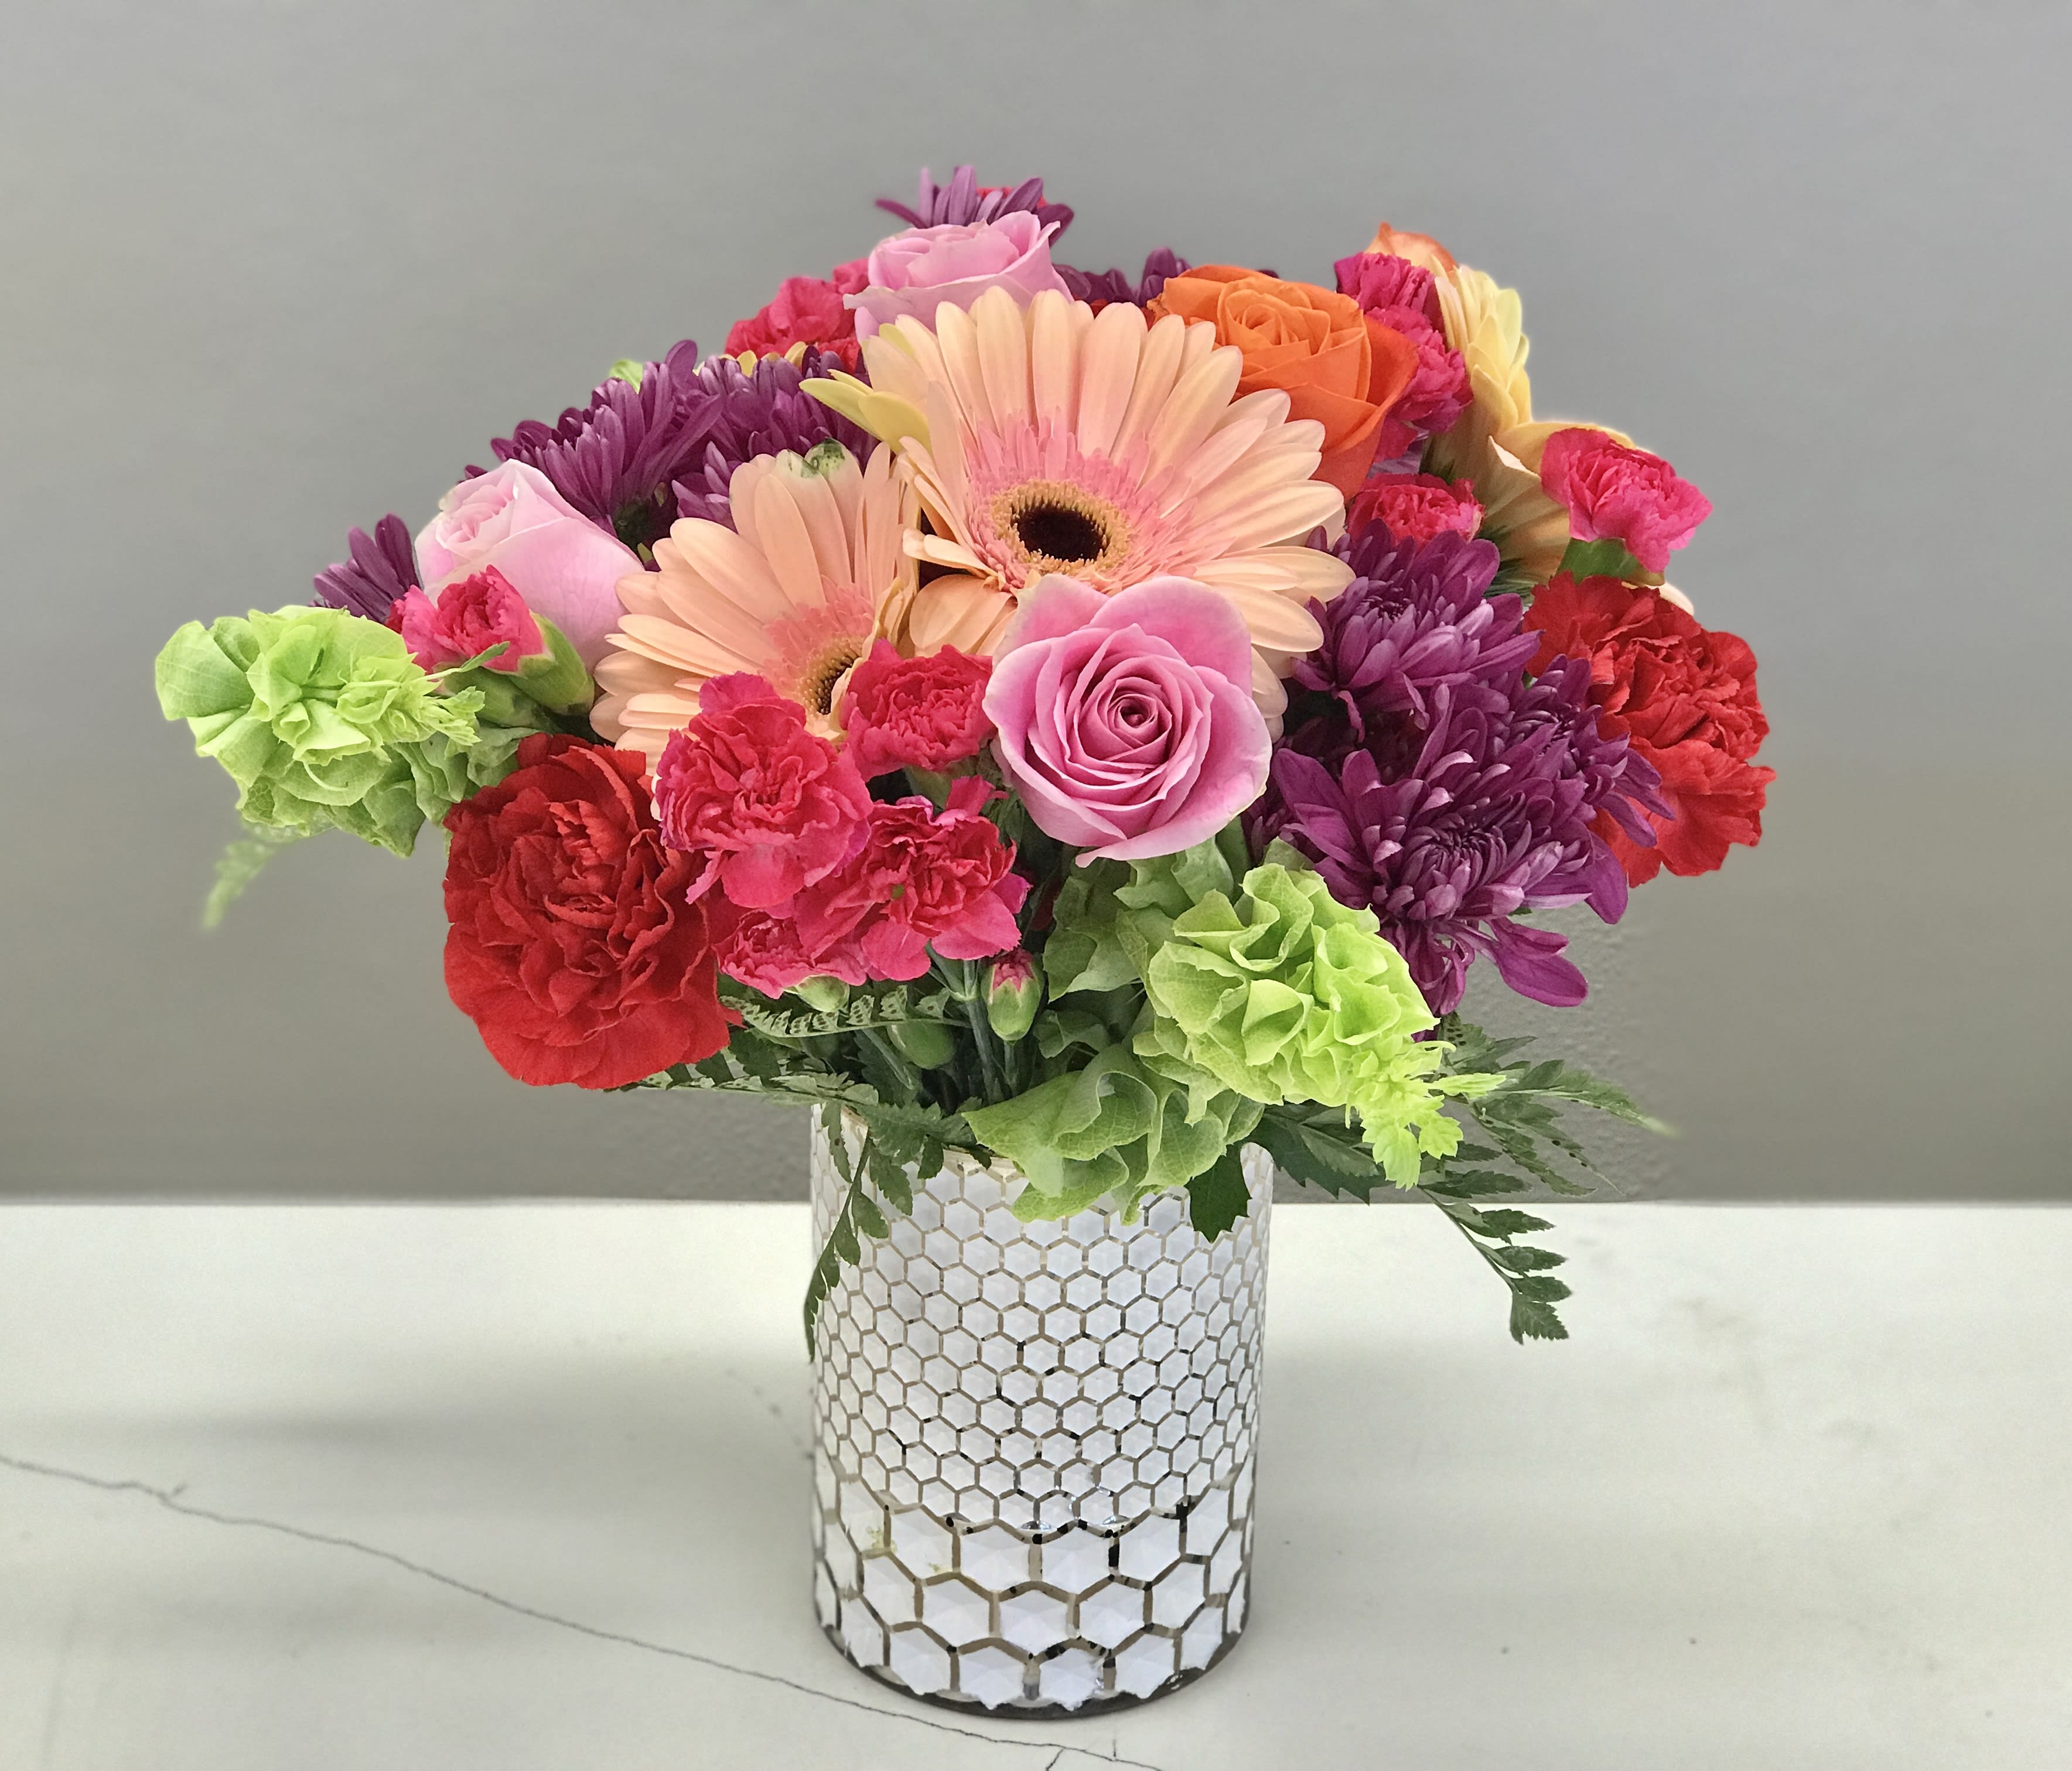 Candy Jar - Colorful blooms full of spilling over remind one of reaching into grandma's bon bon tin. Send a virtual hug with this bright and playful bouquet. 